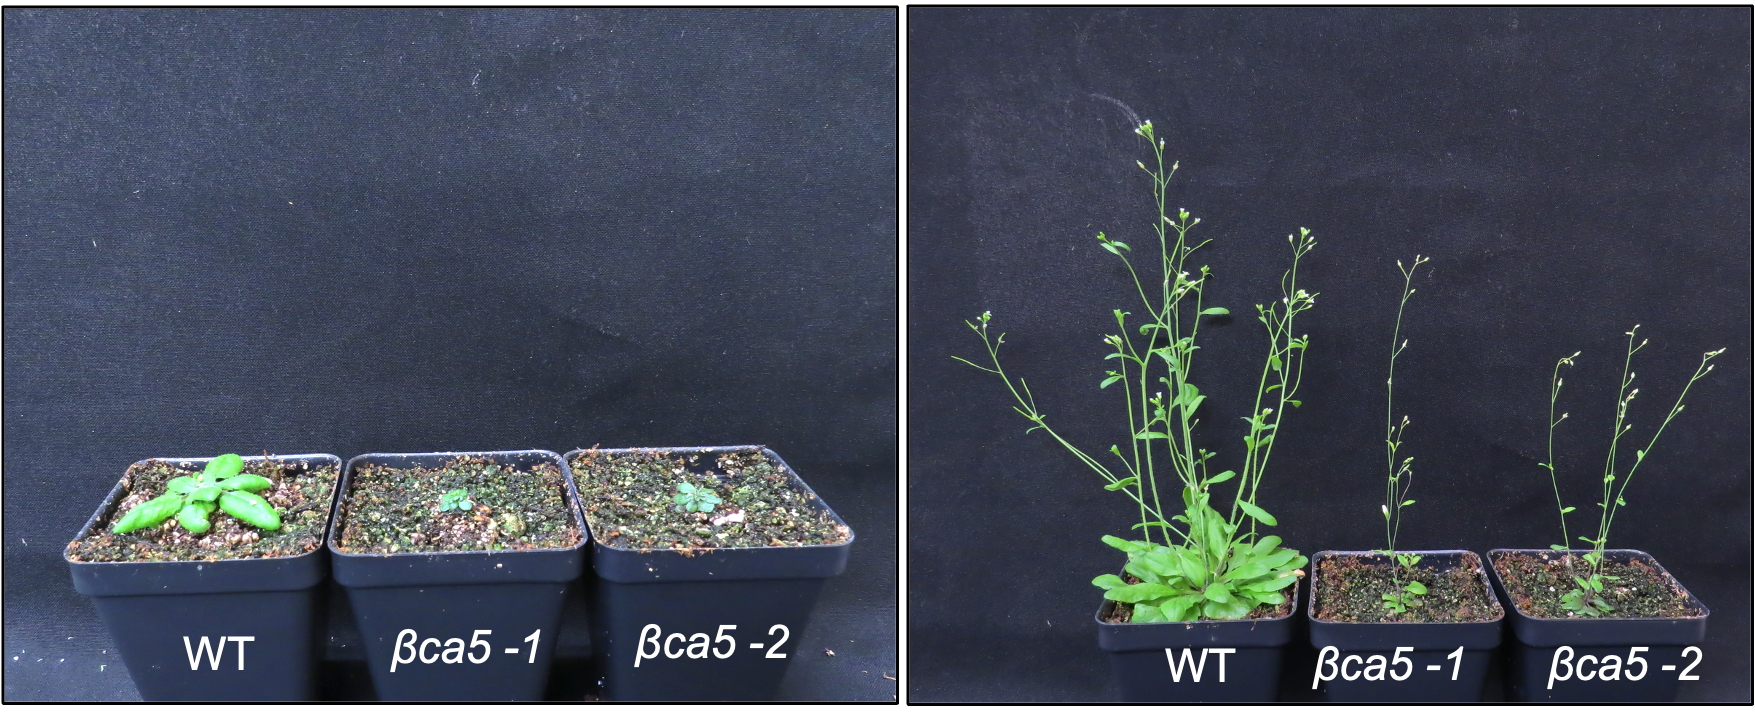 Left image shows three plants. One labeled WT is the largest, the other two labeled BCA5 are shorter. The second photo shows the same plants more grown, the WT is still the largest.